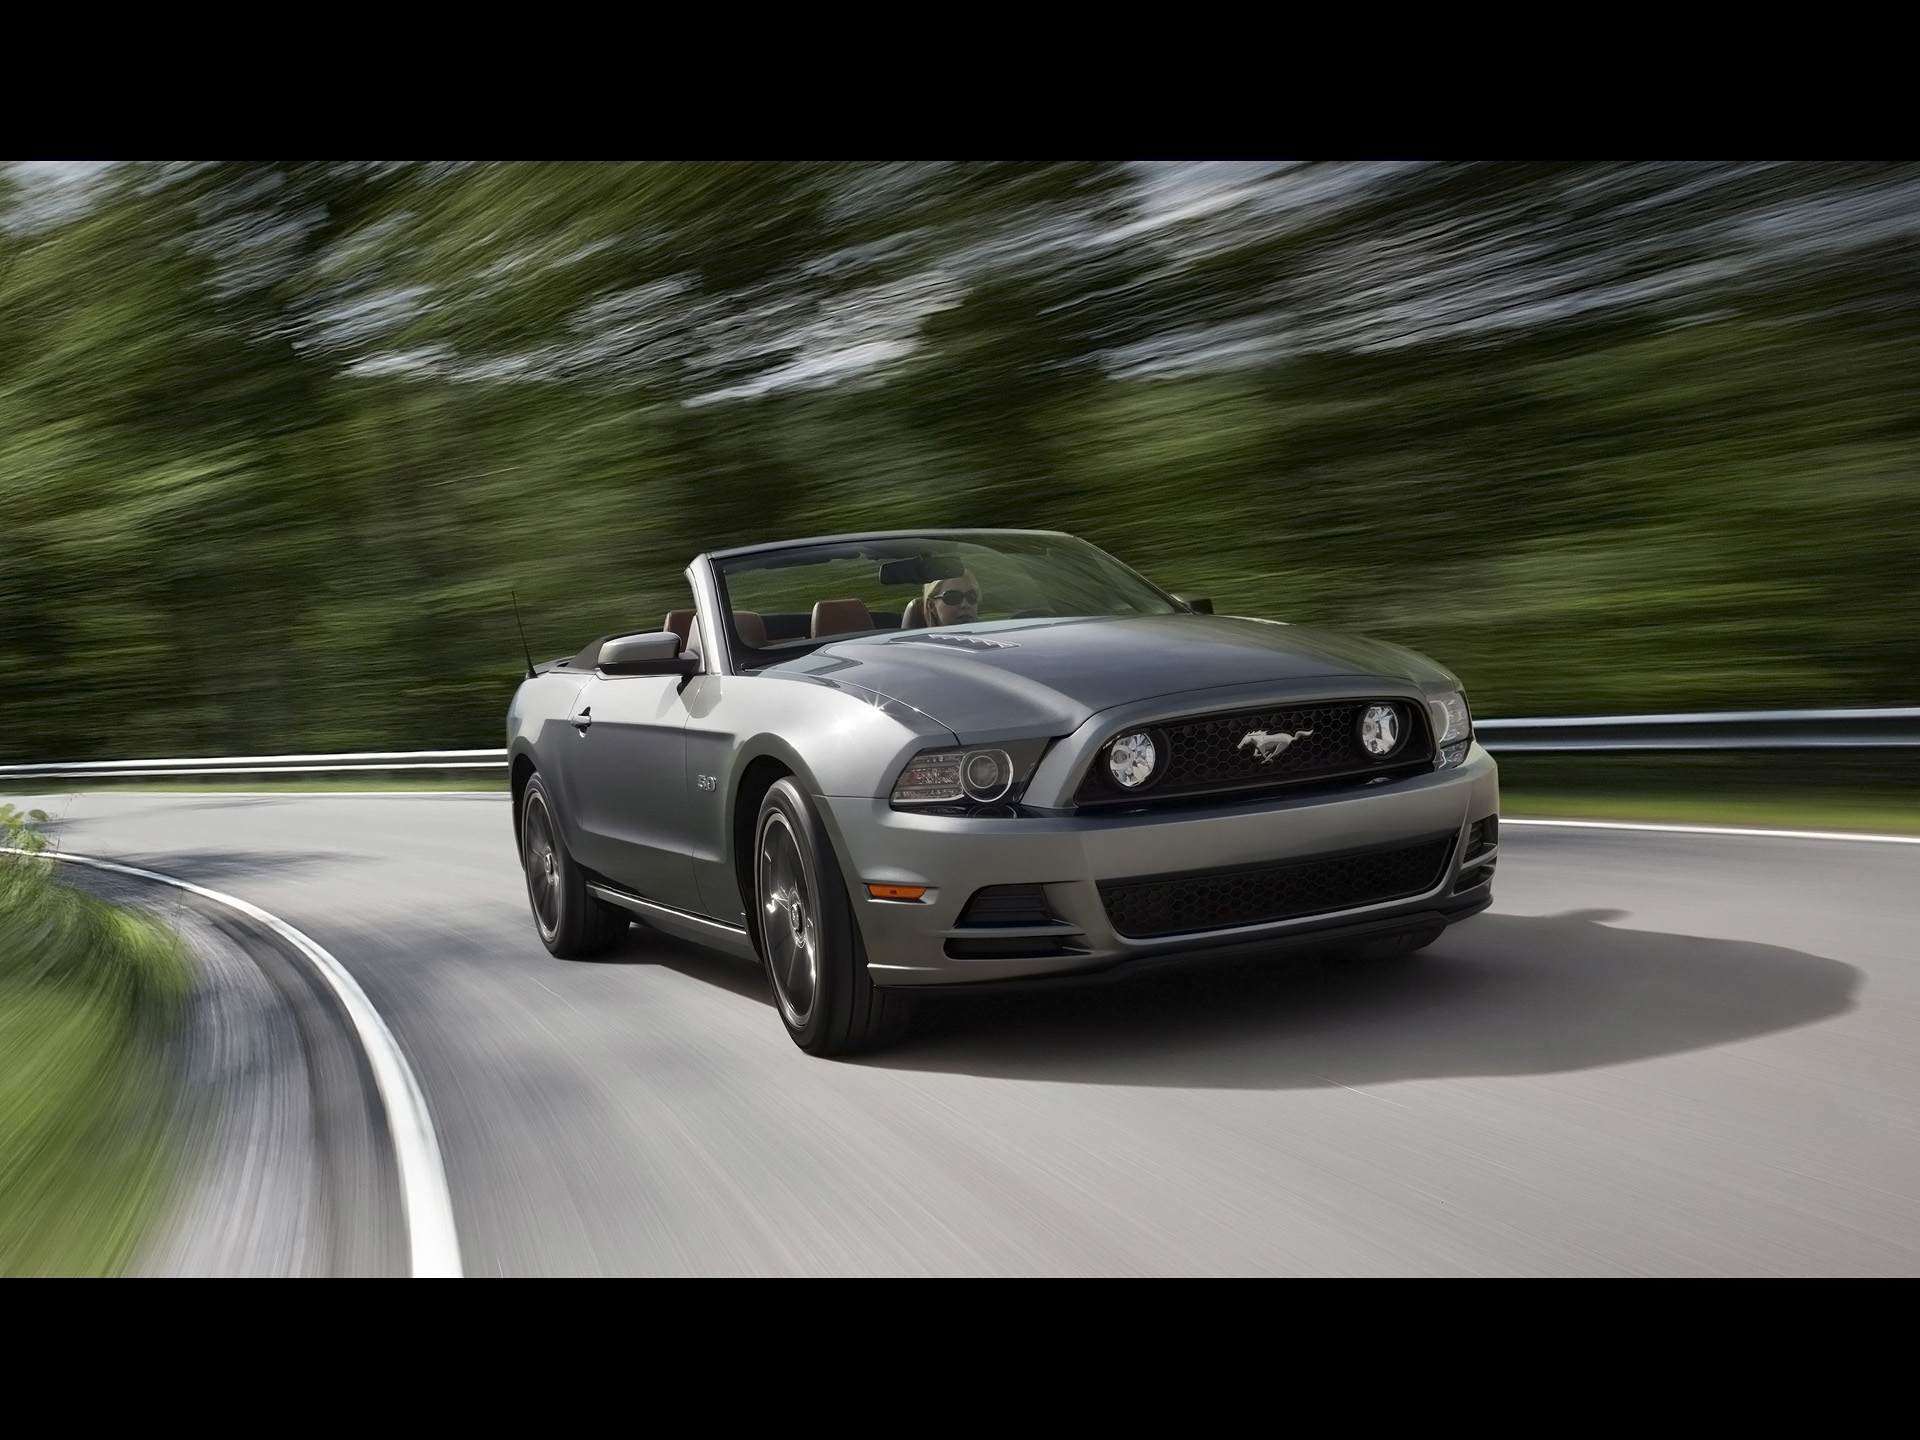 2013 Ford Mustang wallpapers 2013 Ford Mustang stock photos